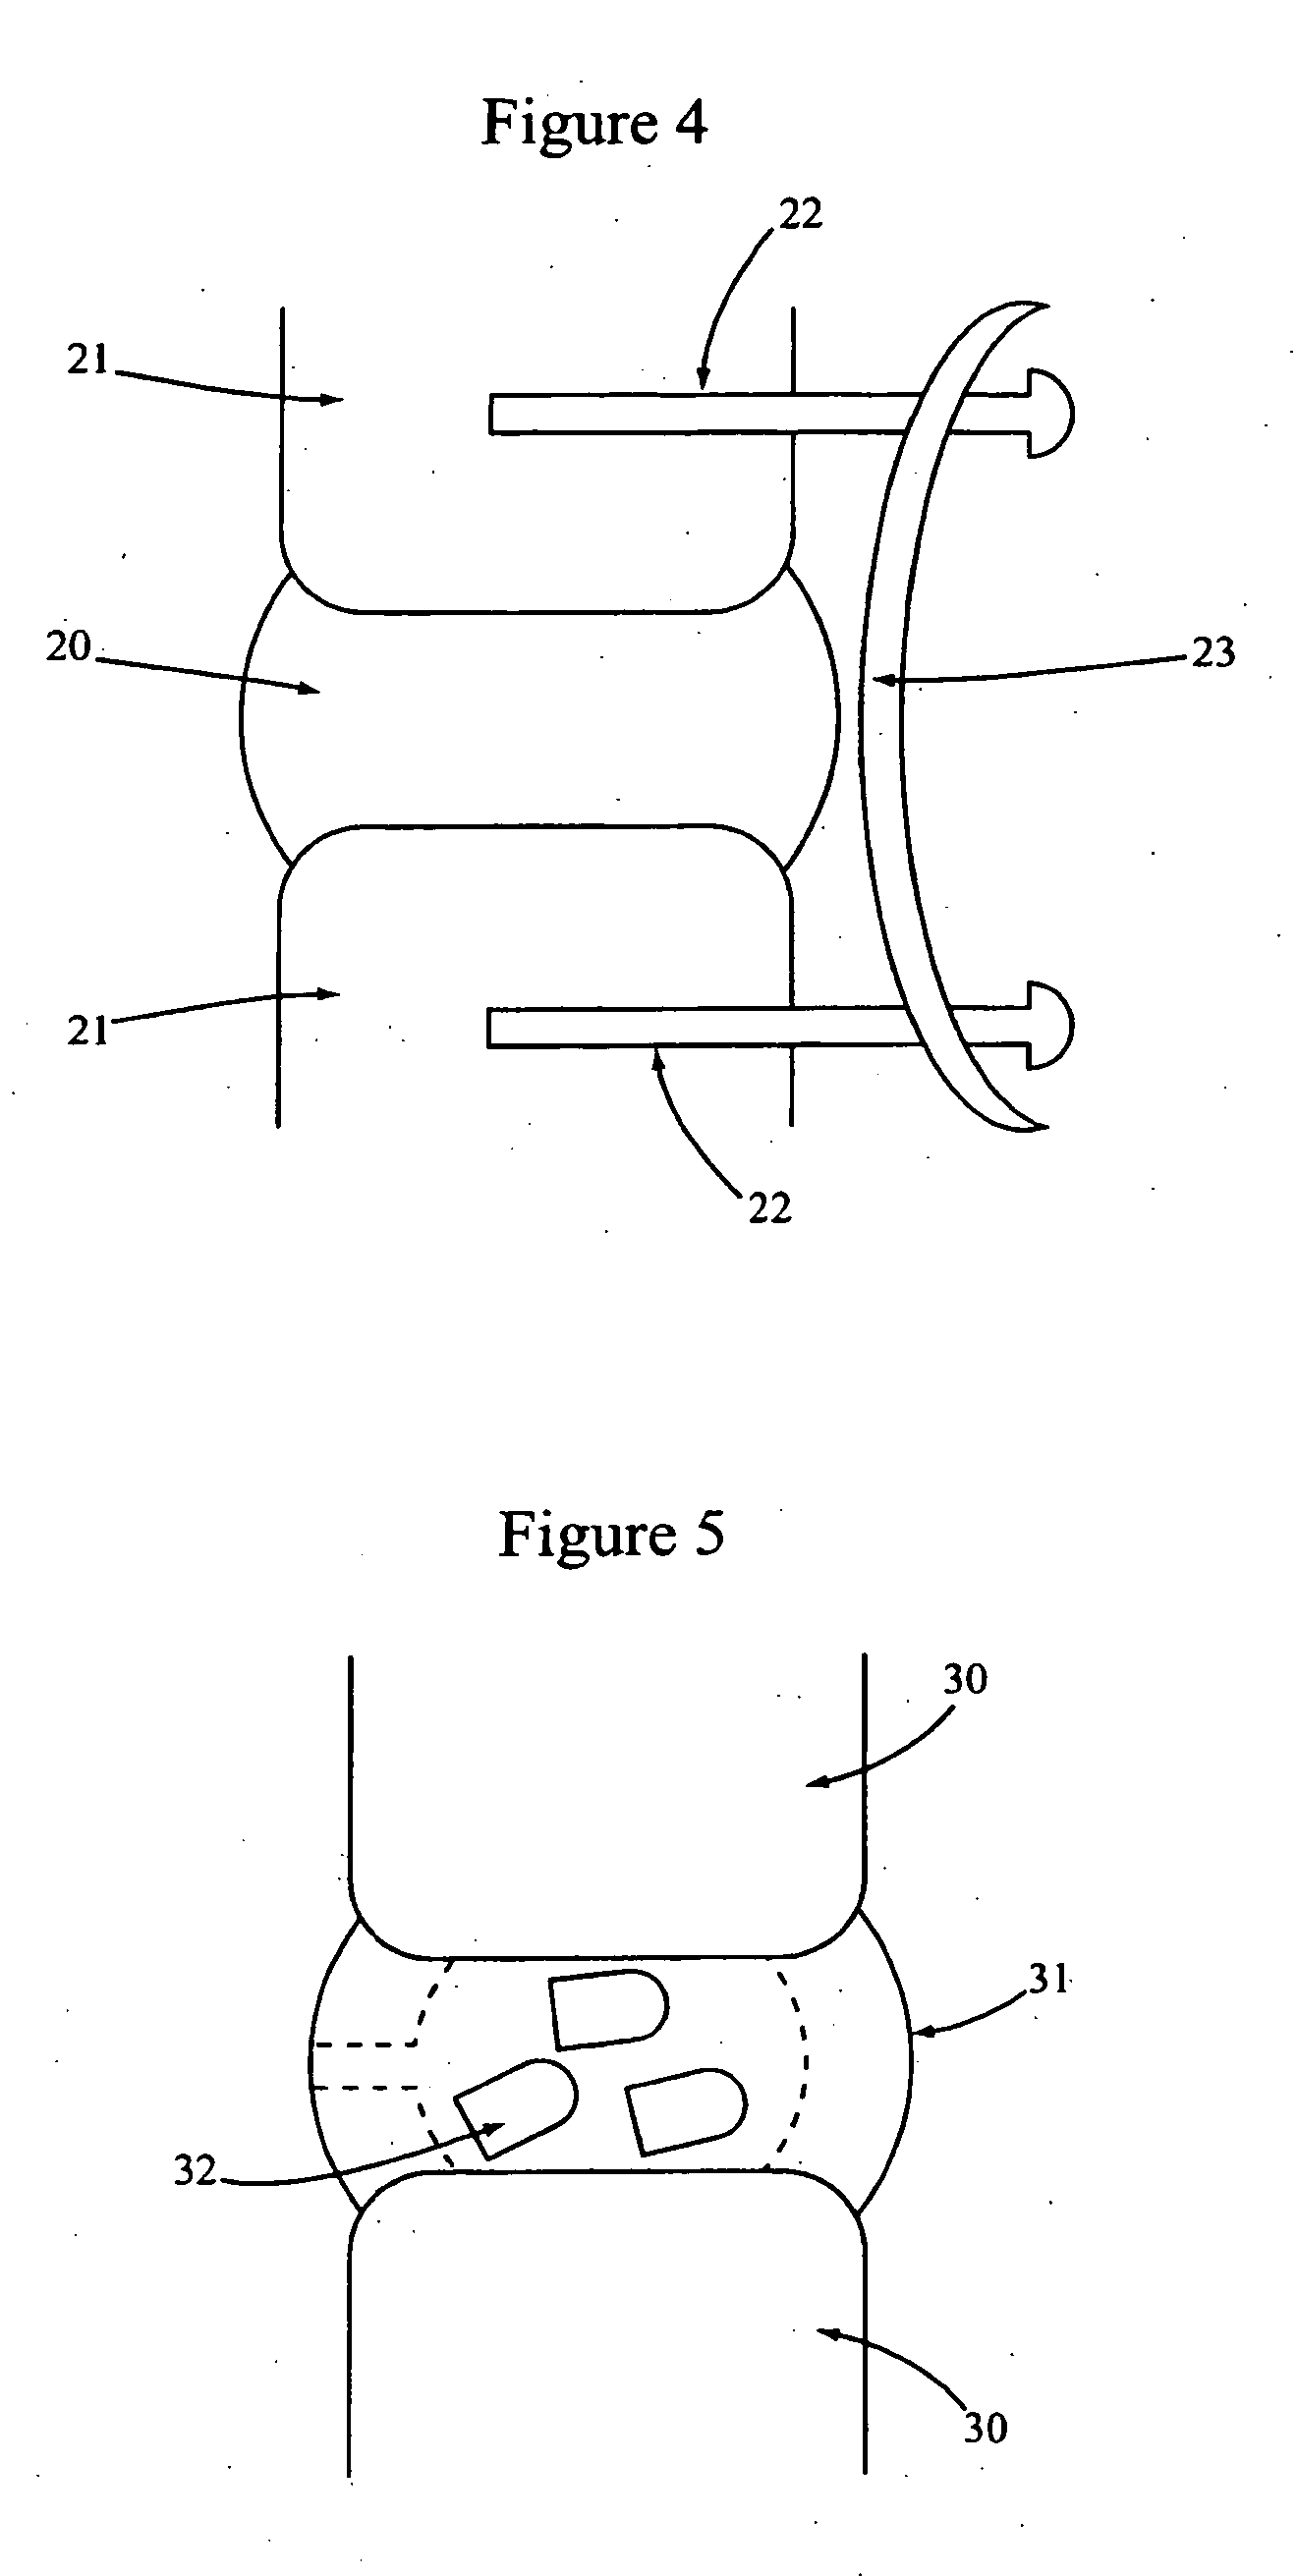 Materials, devices and methods for implantation of transformable implants